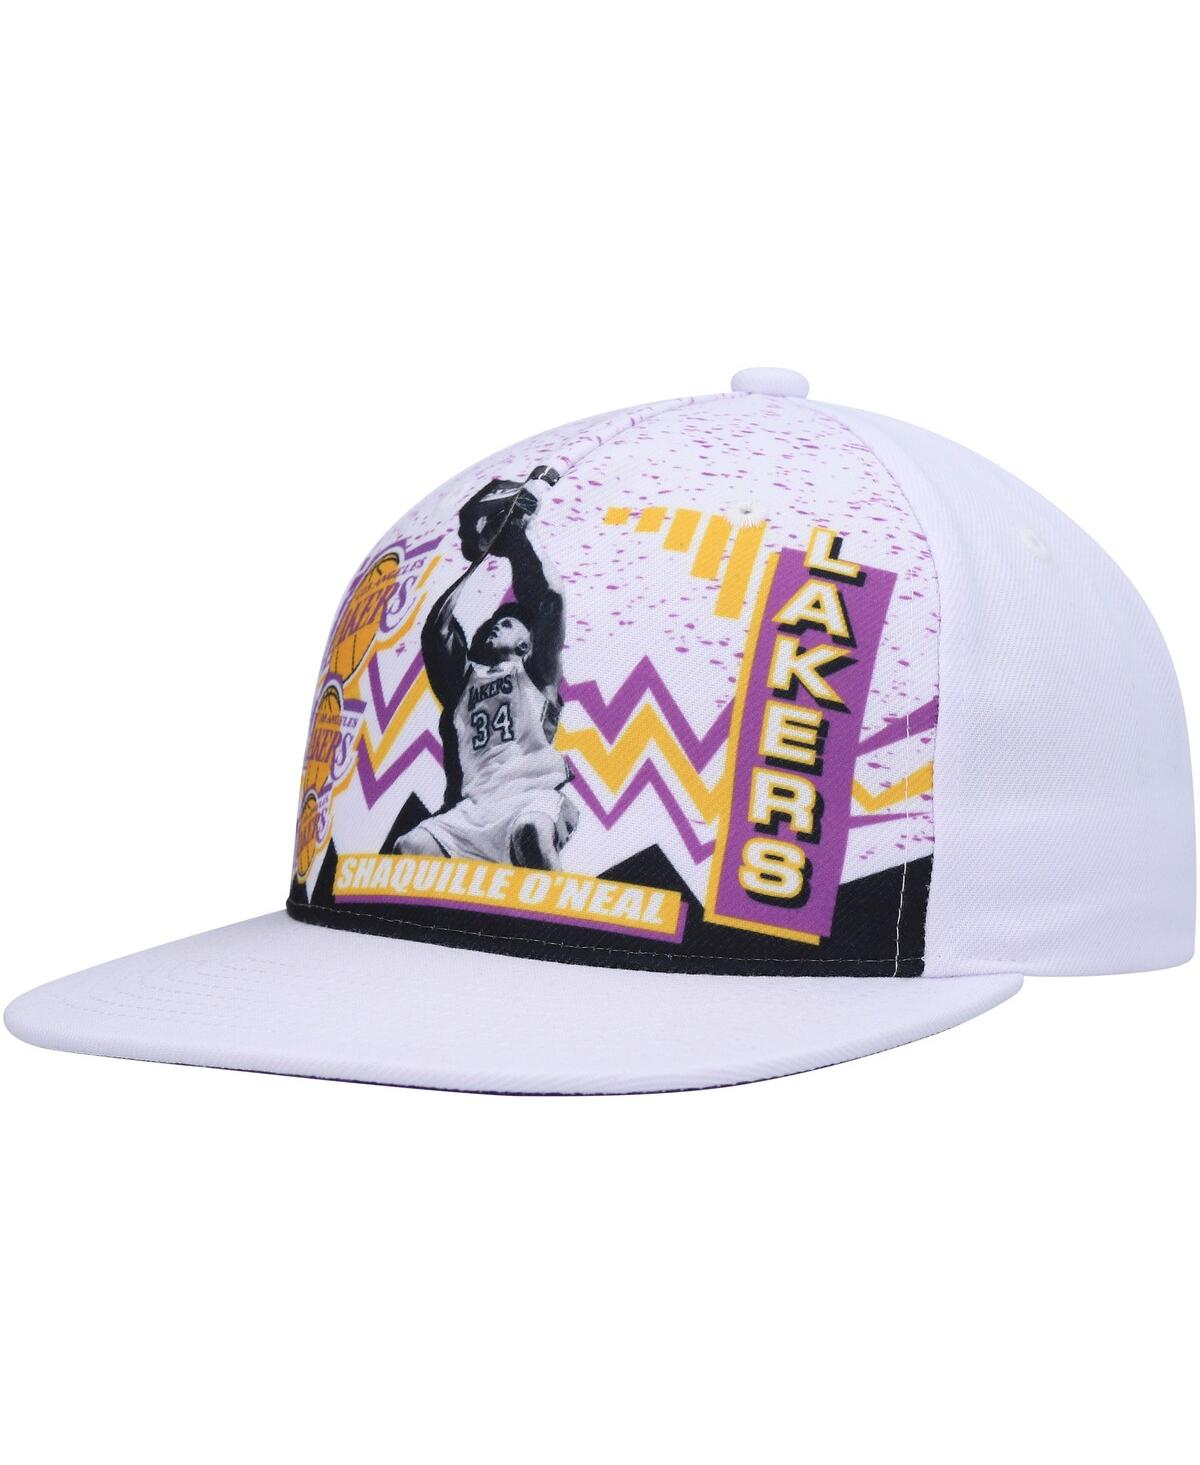 Shop Mitchell & Ness Men's  Shaquille O'neal White Los Angeles Lakers Hardwood Classics 90's Playa Deadsto